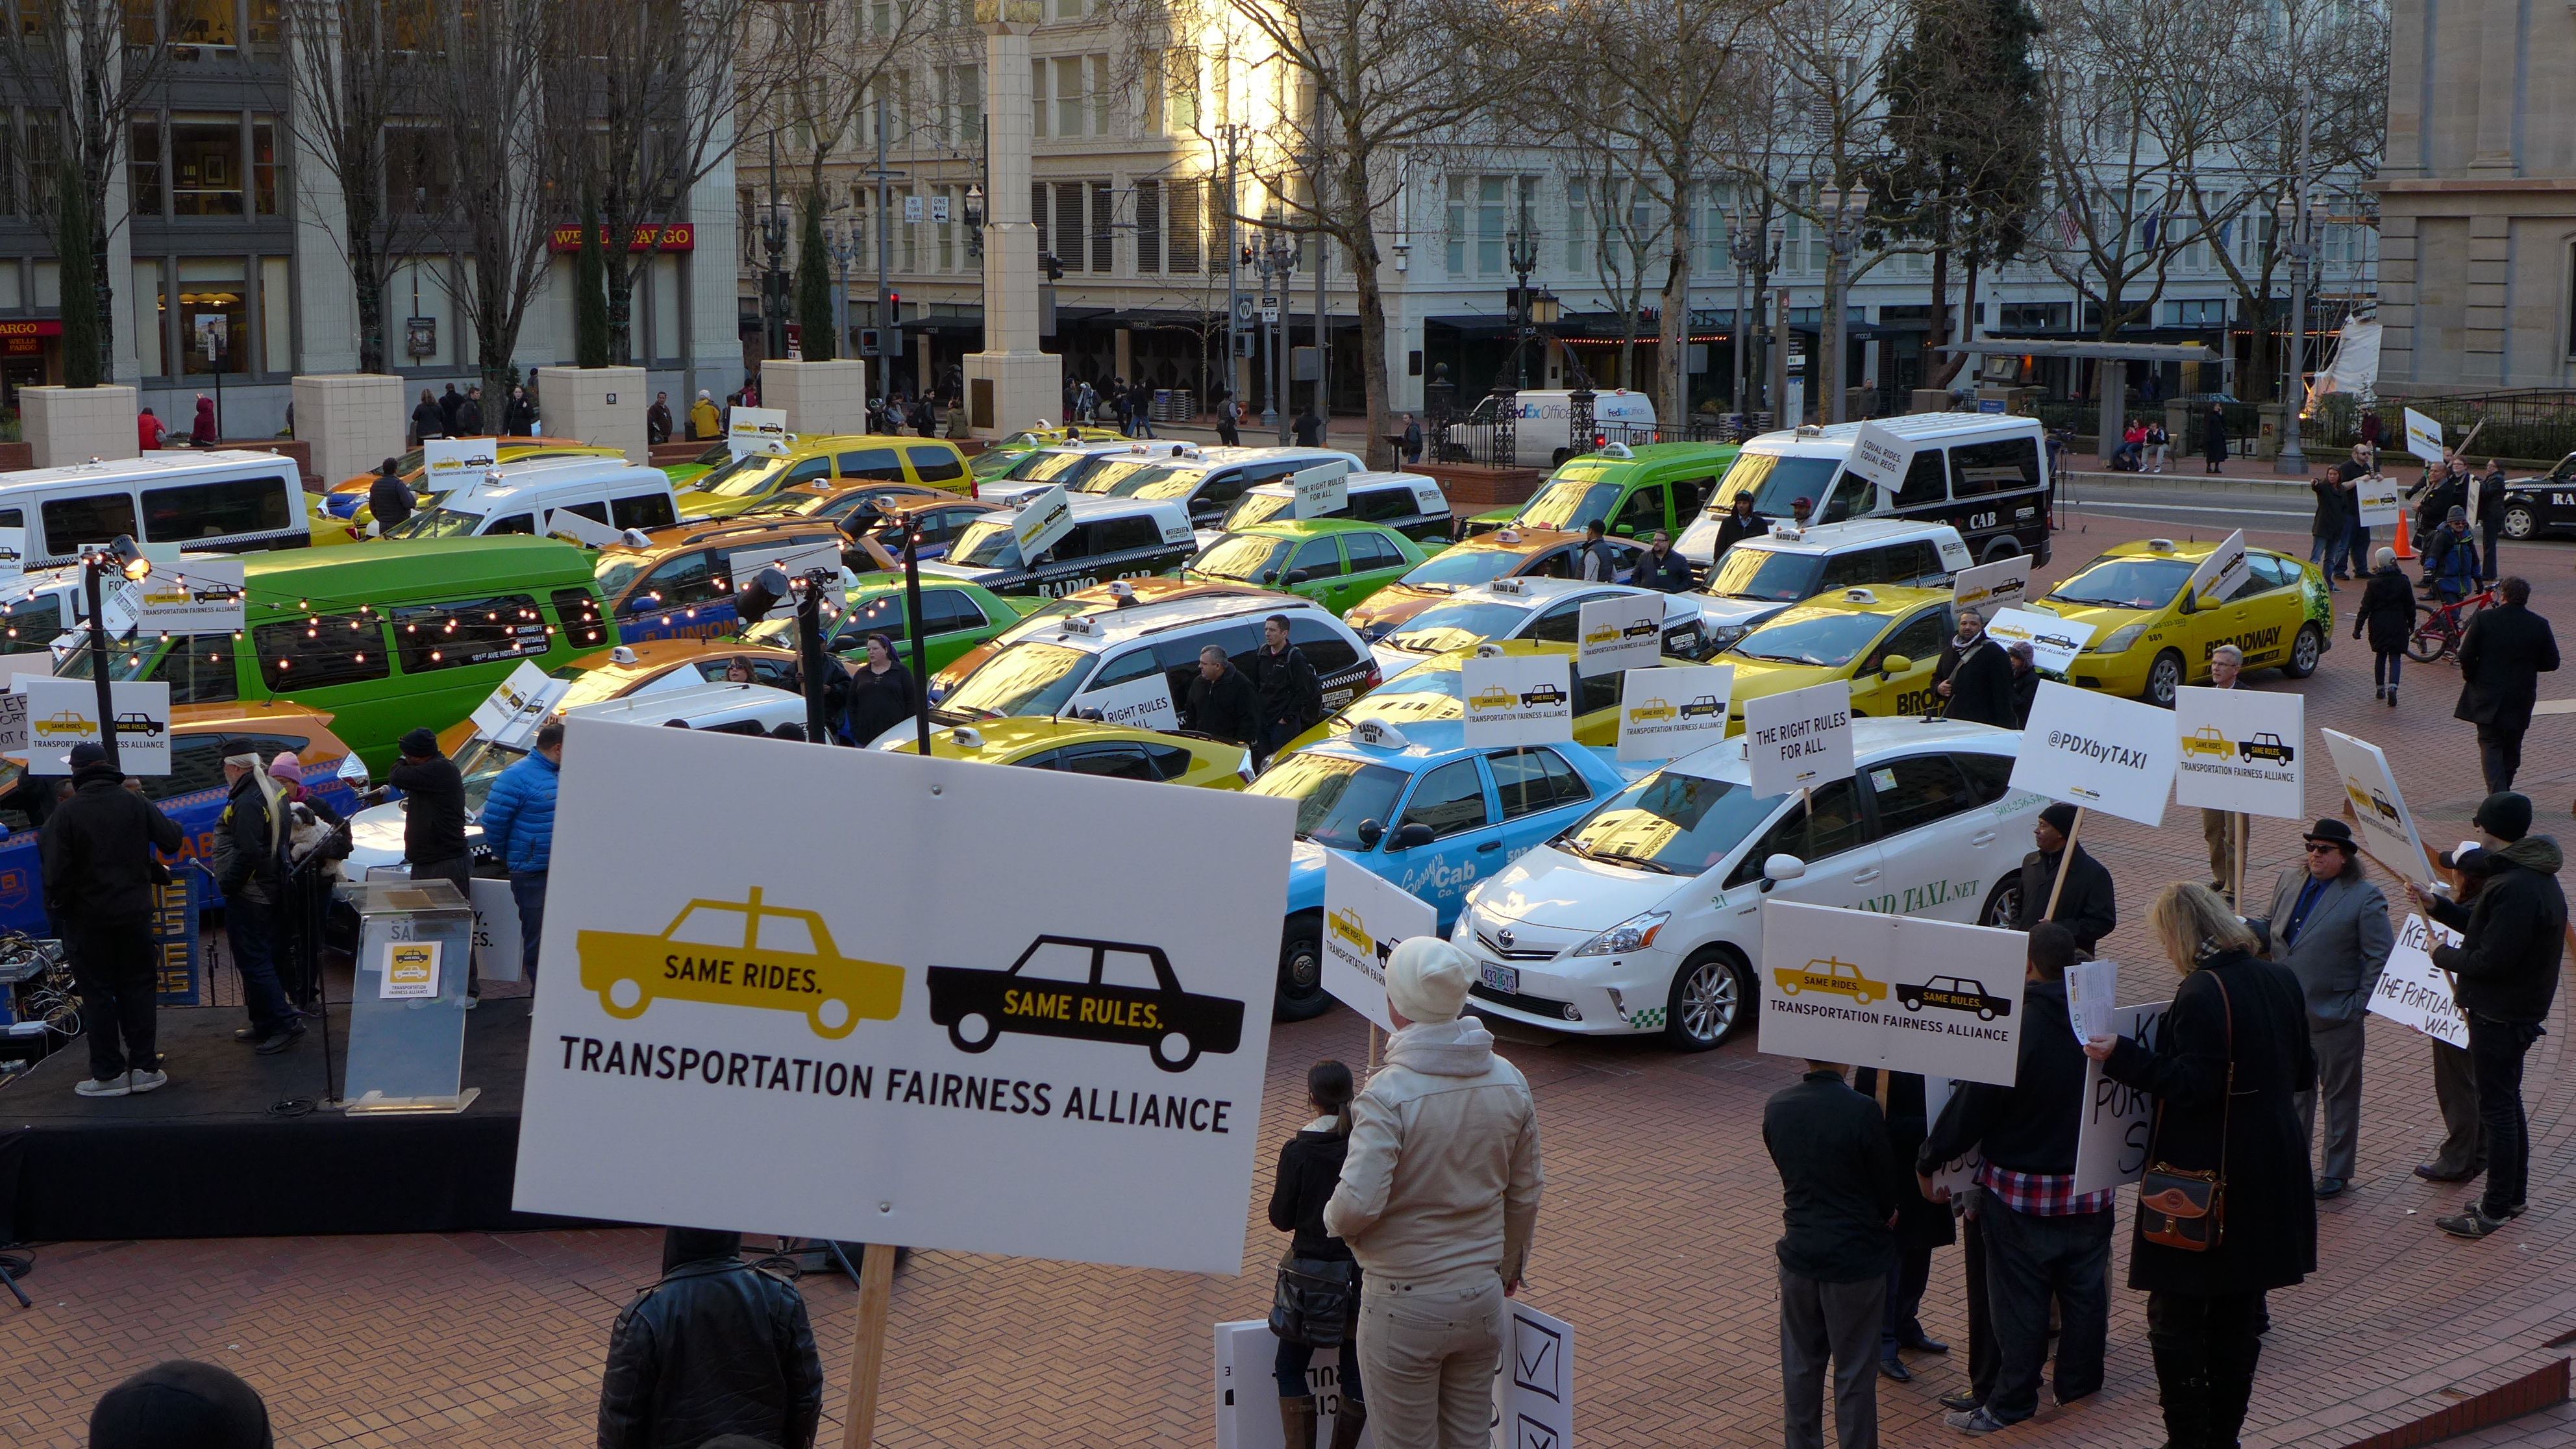 Taxi cab drivers in Portland protesting fair taxi laws in 2015.